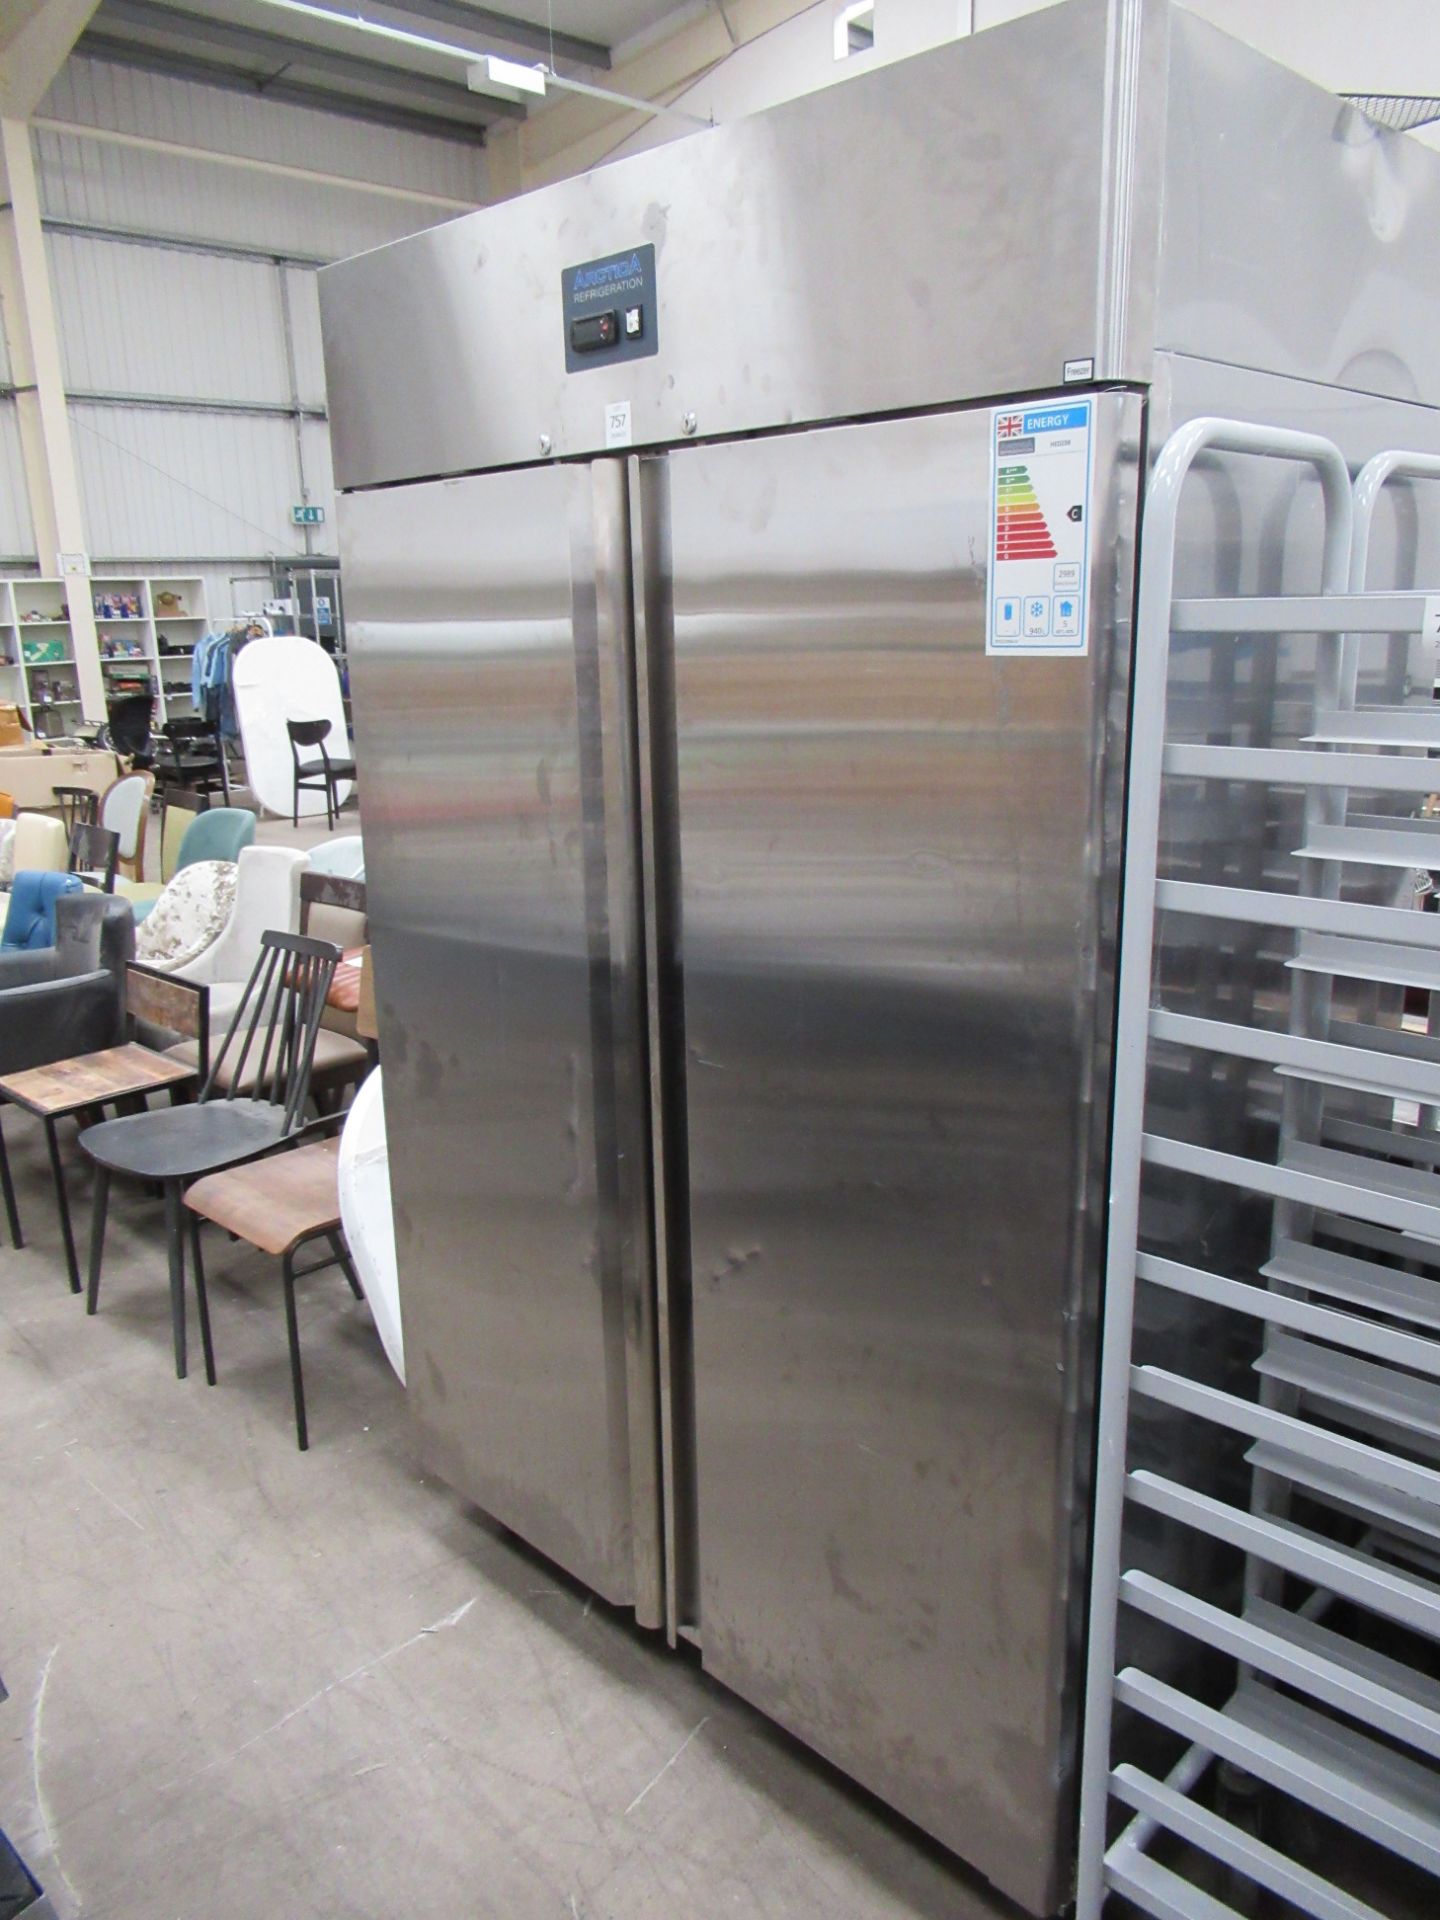 An Arctica Refrigeration stainless steel freezer - Image 2 of 4